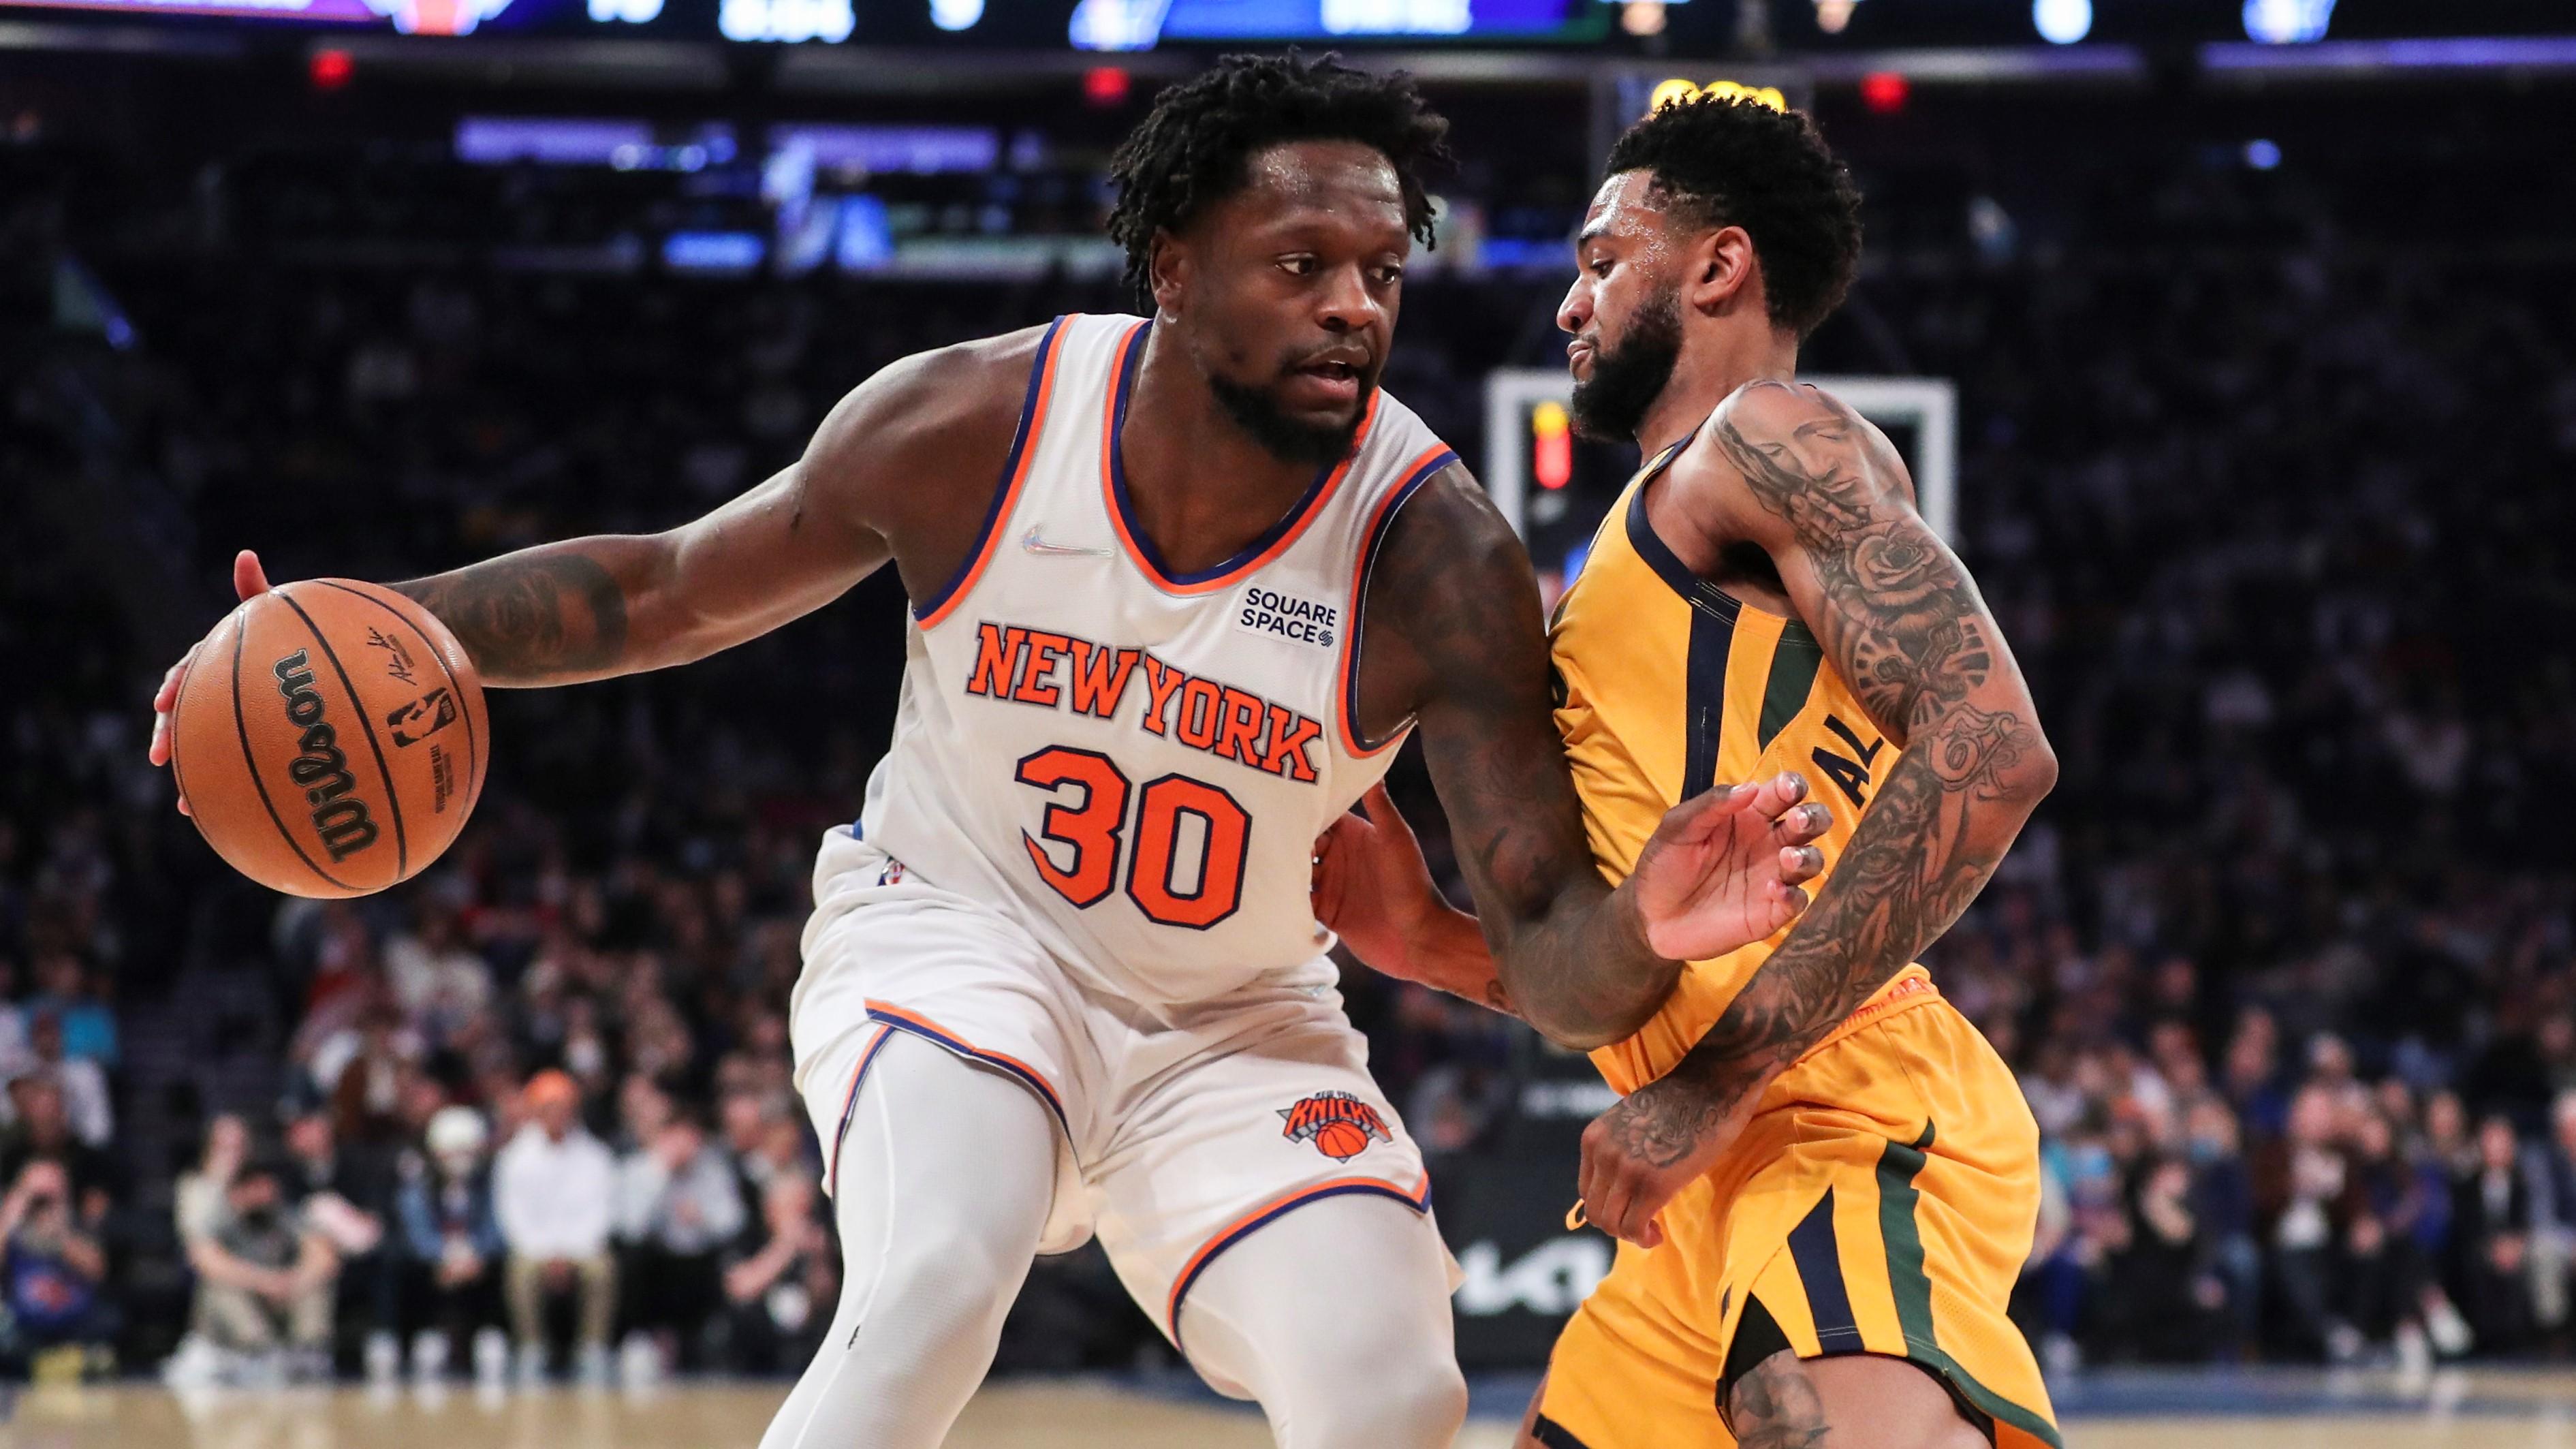 Mar 20, 2022; New York, New York, USA; New York Knicks forward Julius Randle (30) looks to drive past Utah Jazz guard Nickeil Alexander-Walker (6) in the first quarter at Madison Square Garden. / Wendell Cruz-USA TODAY Sports